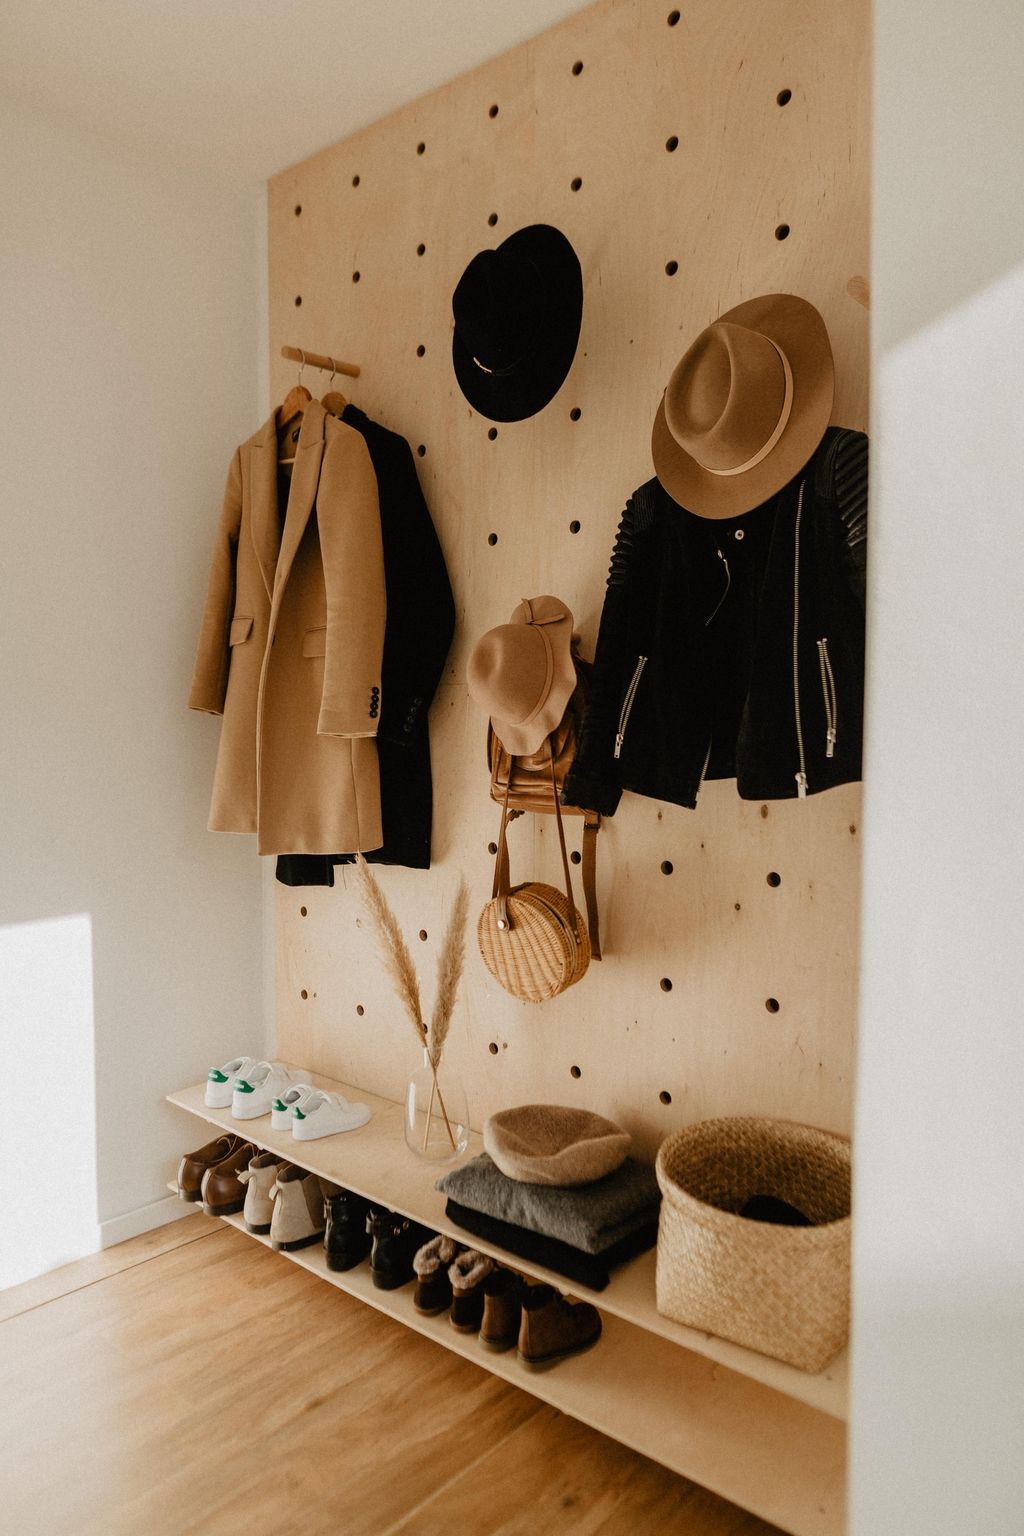 Create Your Dream Wardrobe: DIY Tips and
Tricks